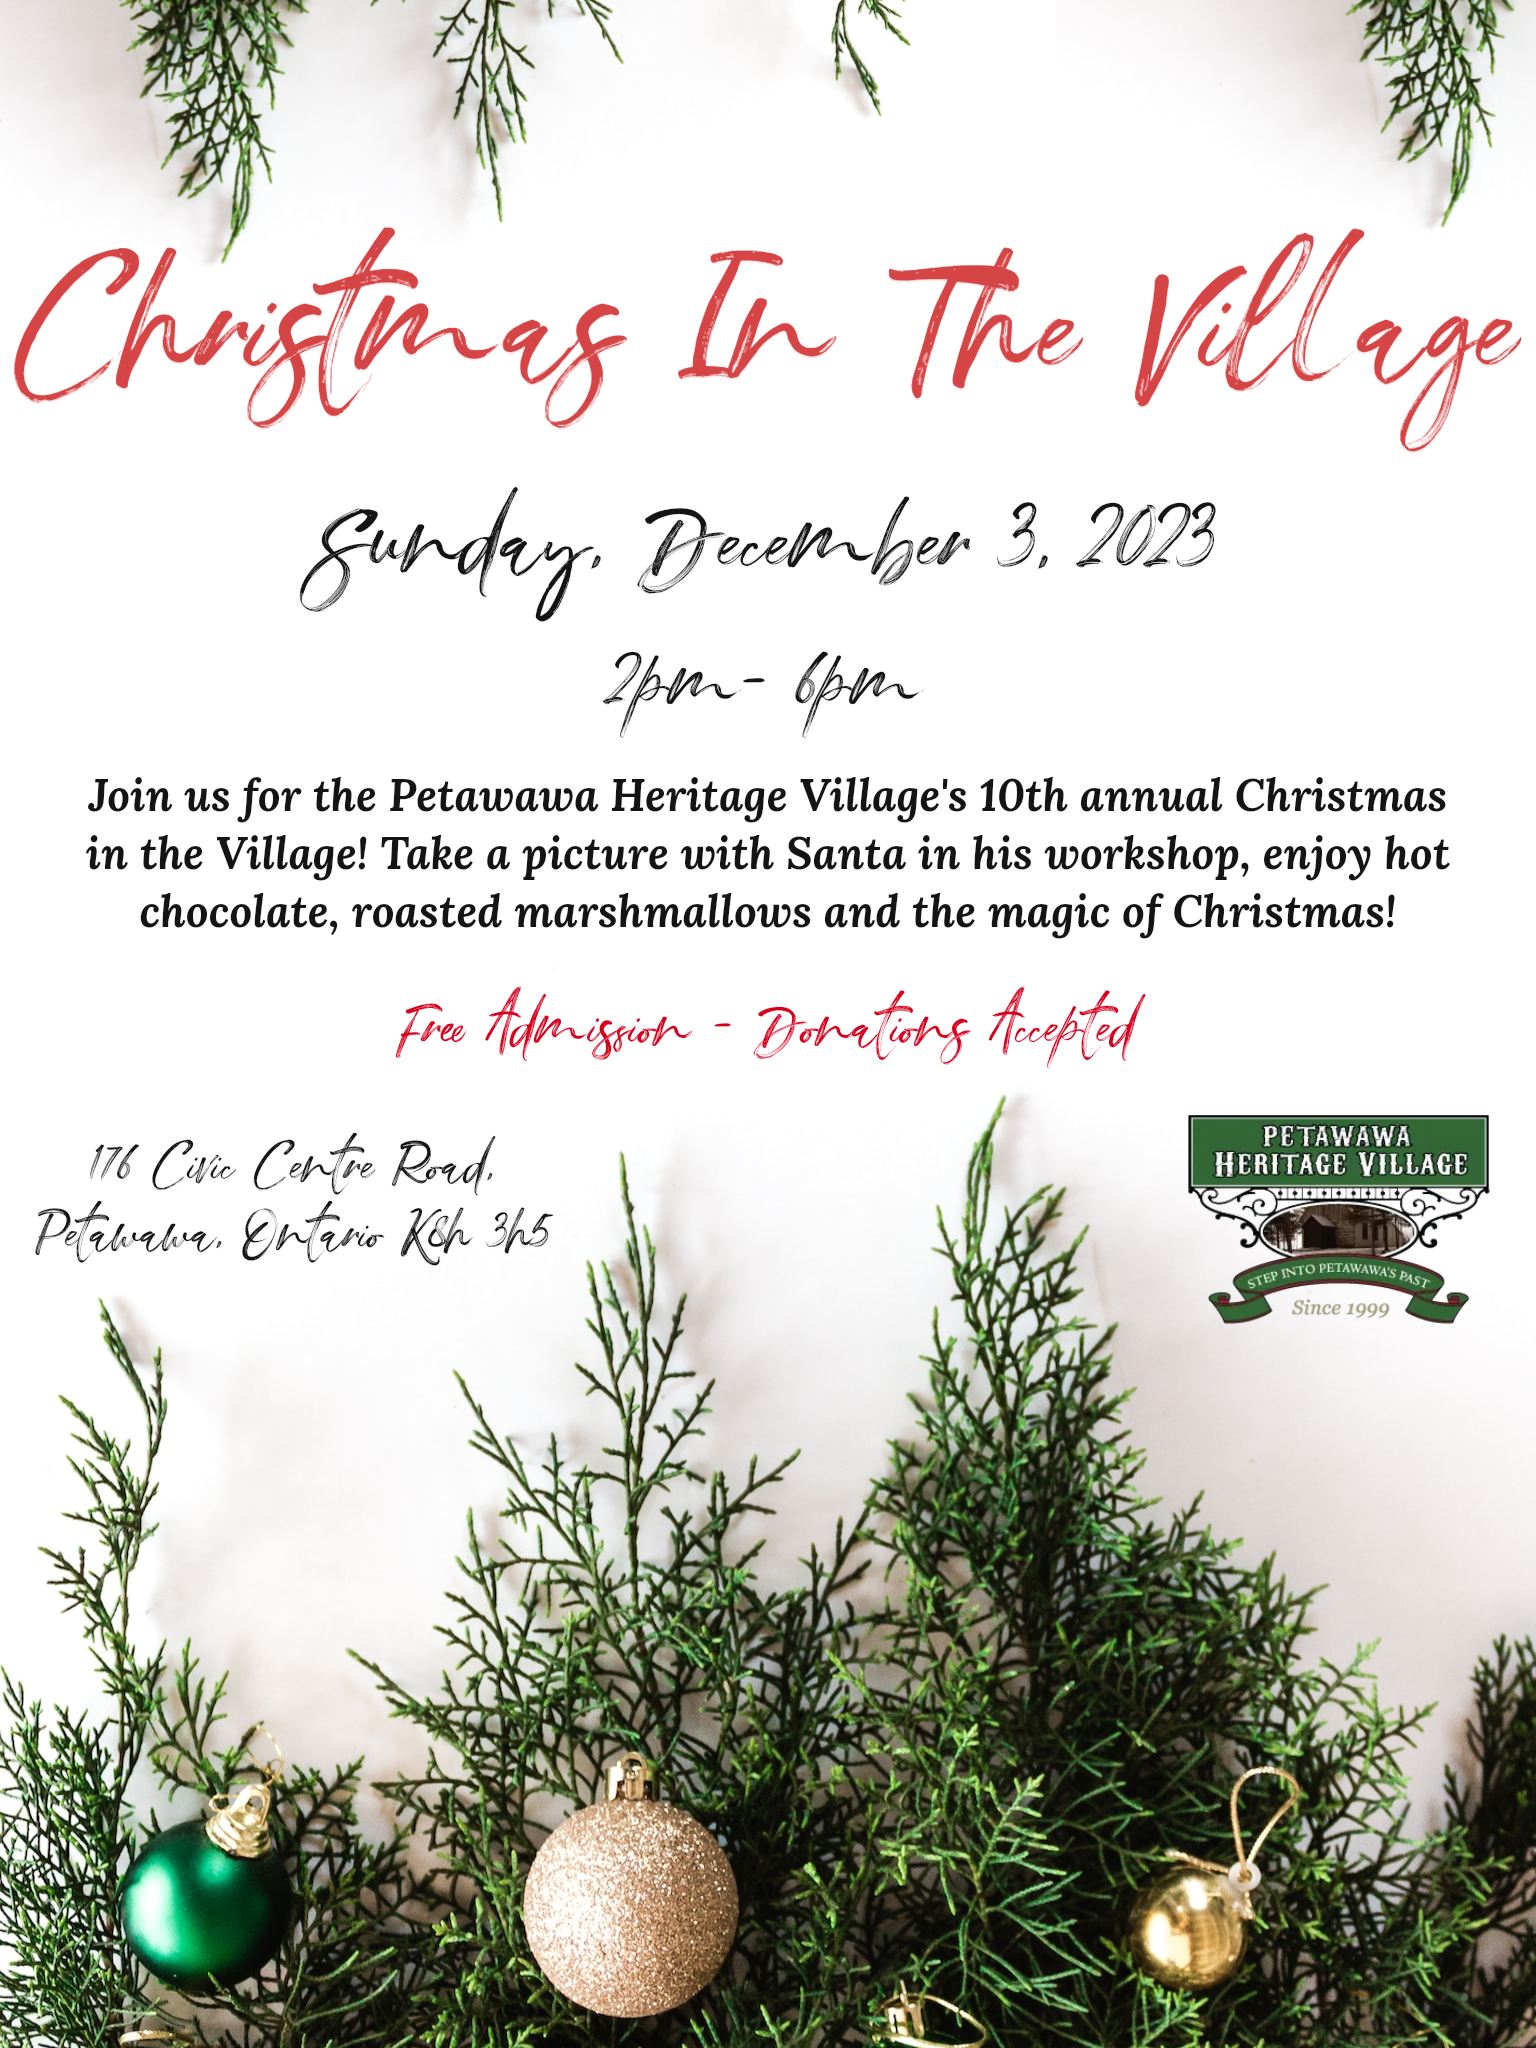 poster of Christmas in the Village - Heritage Market